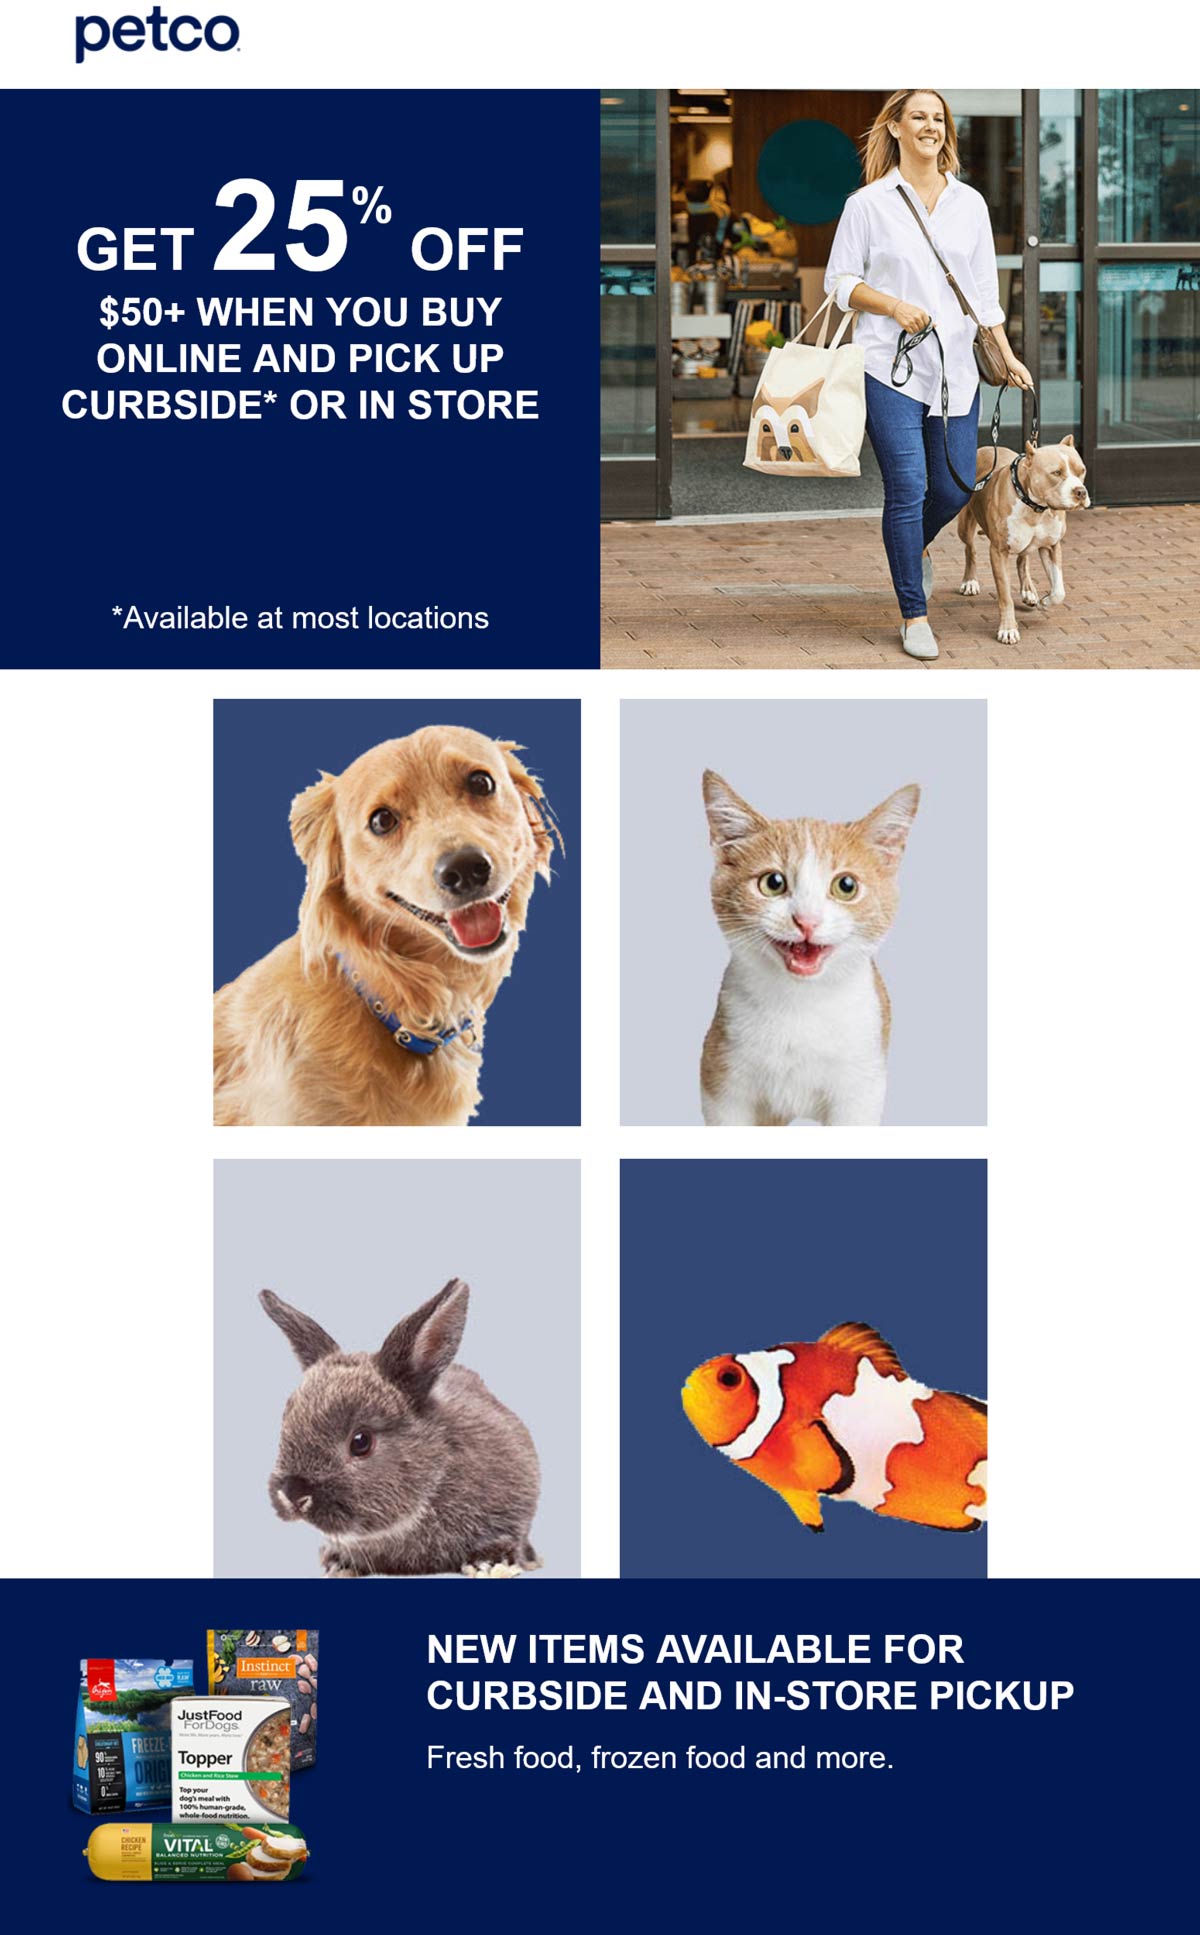 25 off 50 with curbside pickup at Petco petco The Coupons App®